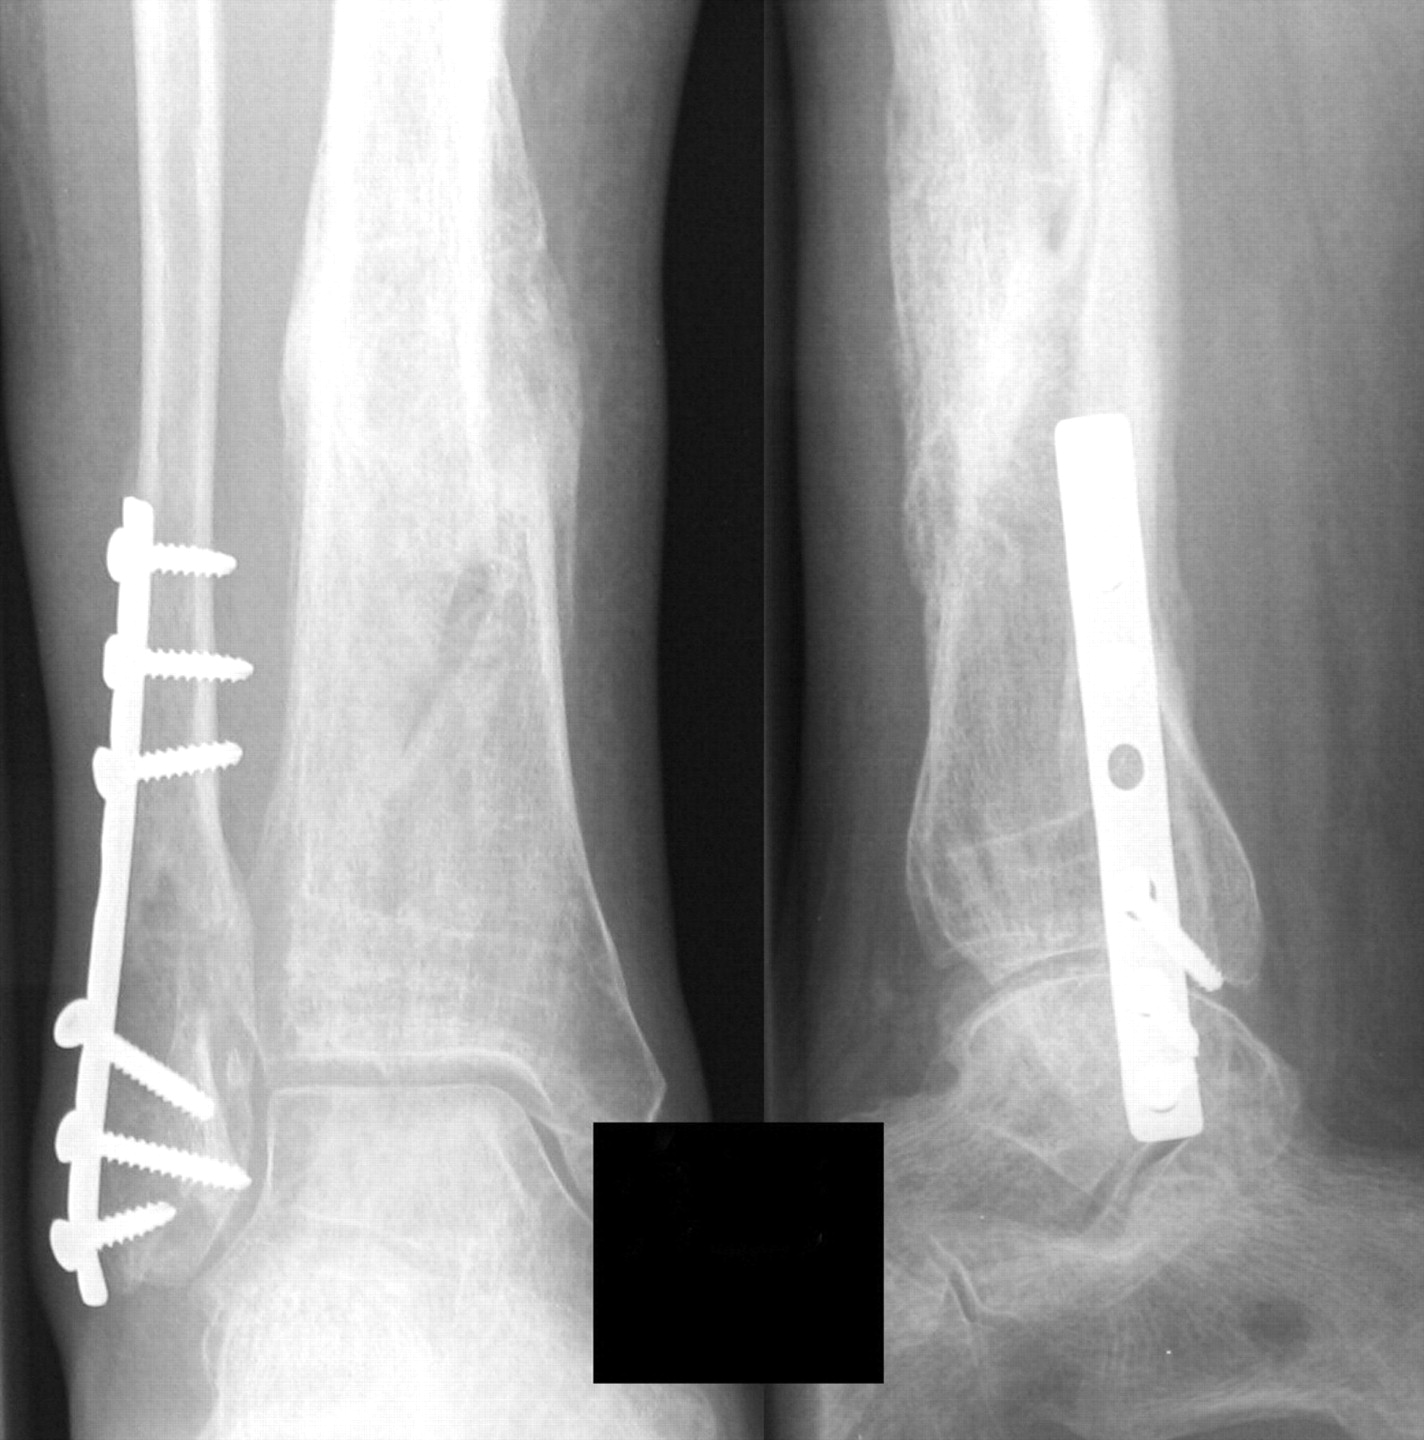 Rhbmp 7 Accelerates The Healing In Distal Tibial Fractures Treated By